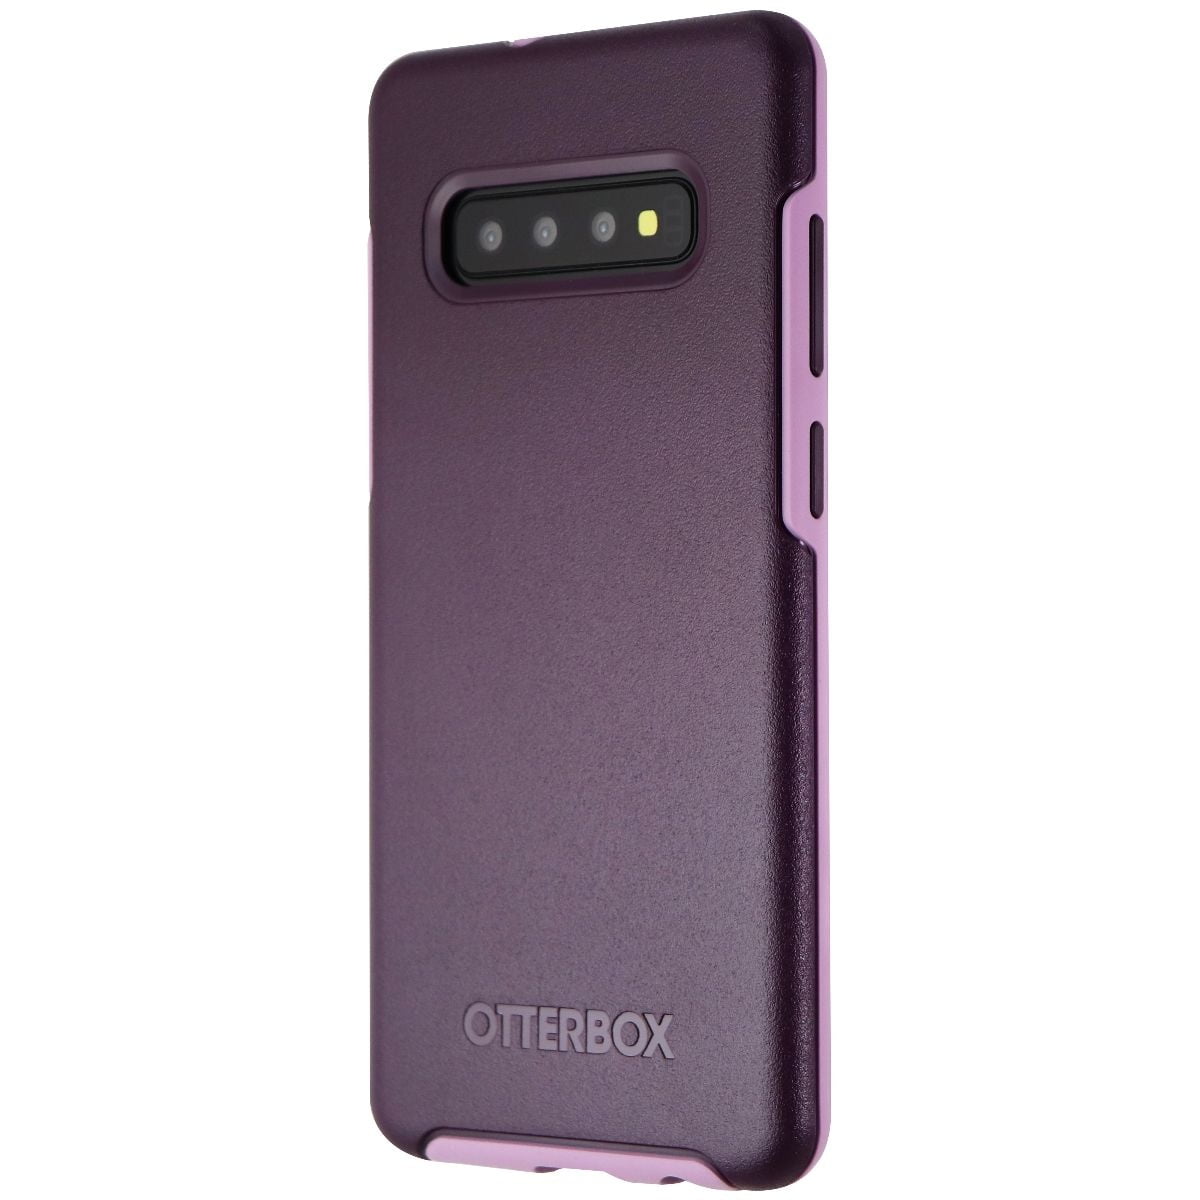 WINTER BLOOM/LAVENDER MIST OtterBox SYMMETRY SERIES Case for Galaxy S10+ TONIC VIOLET Retail Packaging 